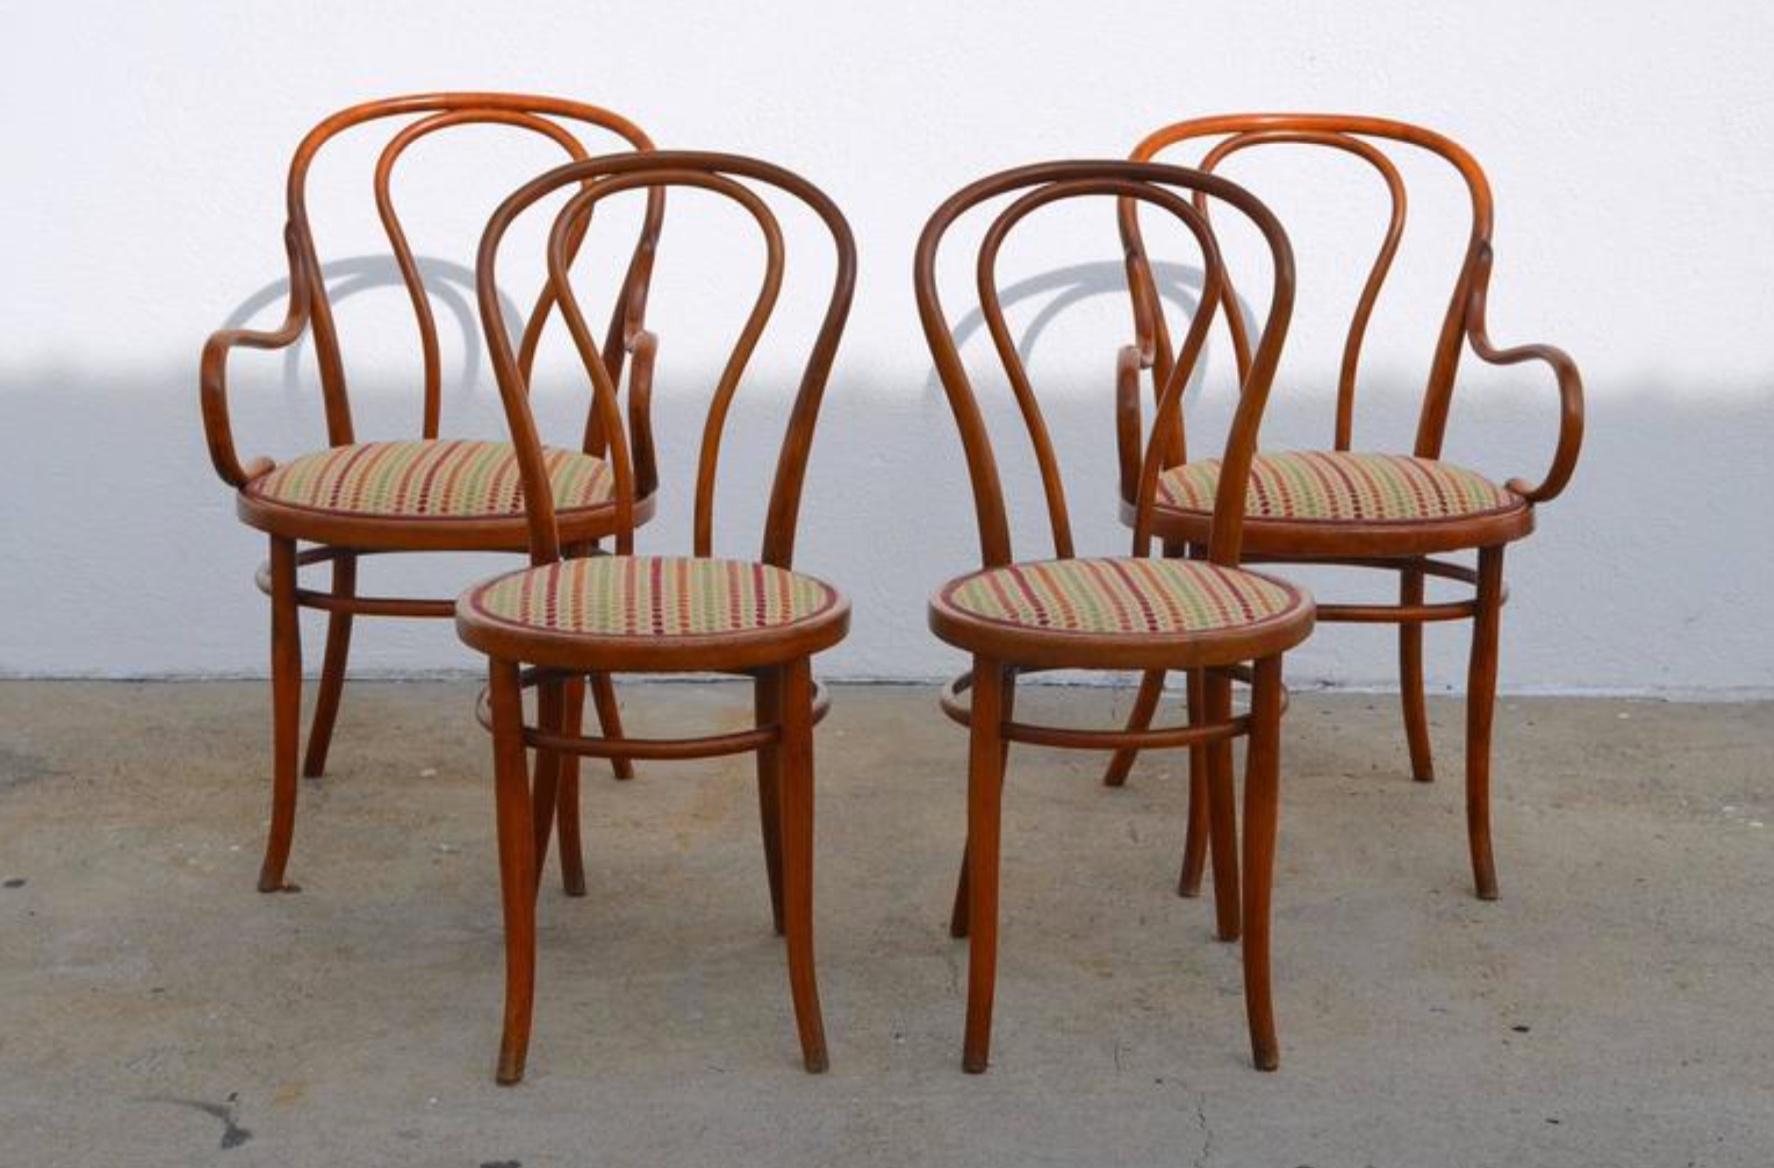 Set of four large slender bentwood dining set by Thonet. Early 20th century European production. Seat fabric can be changed with C. O. M. (one yard) at no extra charge.

Dimensions:

Armchair: 36 in. tall / 19 in. seat height, 23 in. wide, 27.5